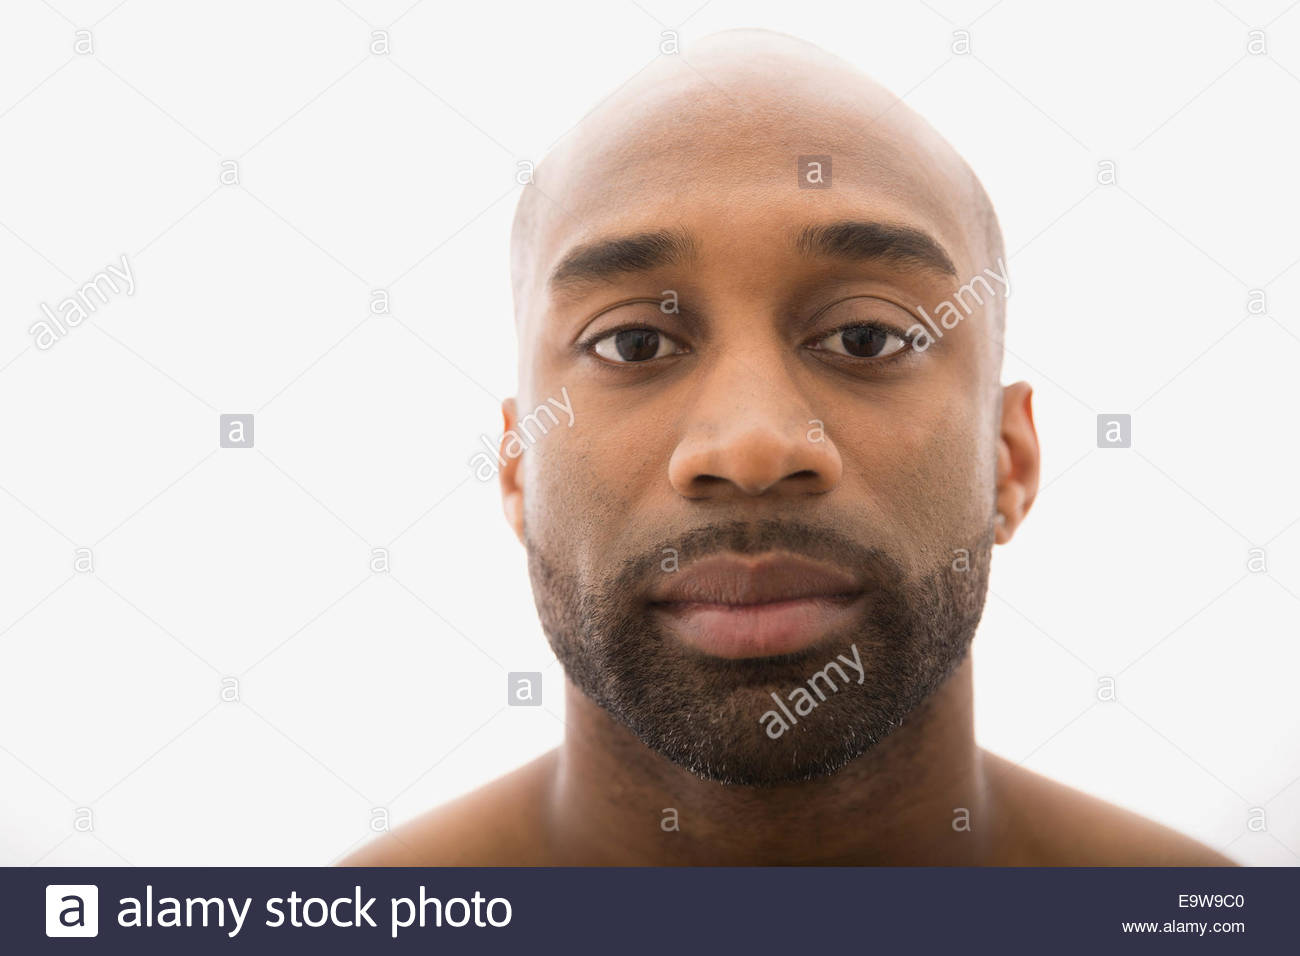 Close up portrait of serious man with beard Stock Photo